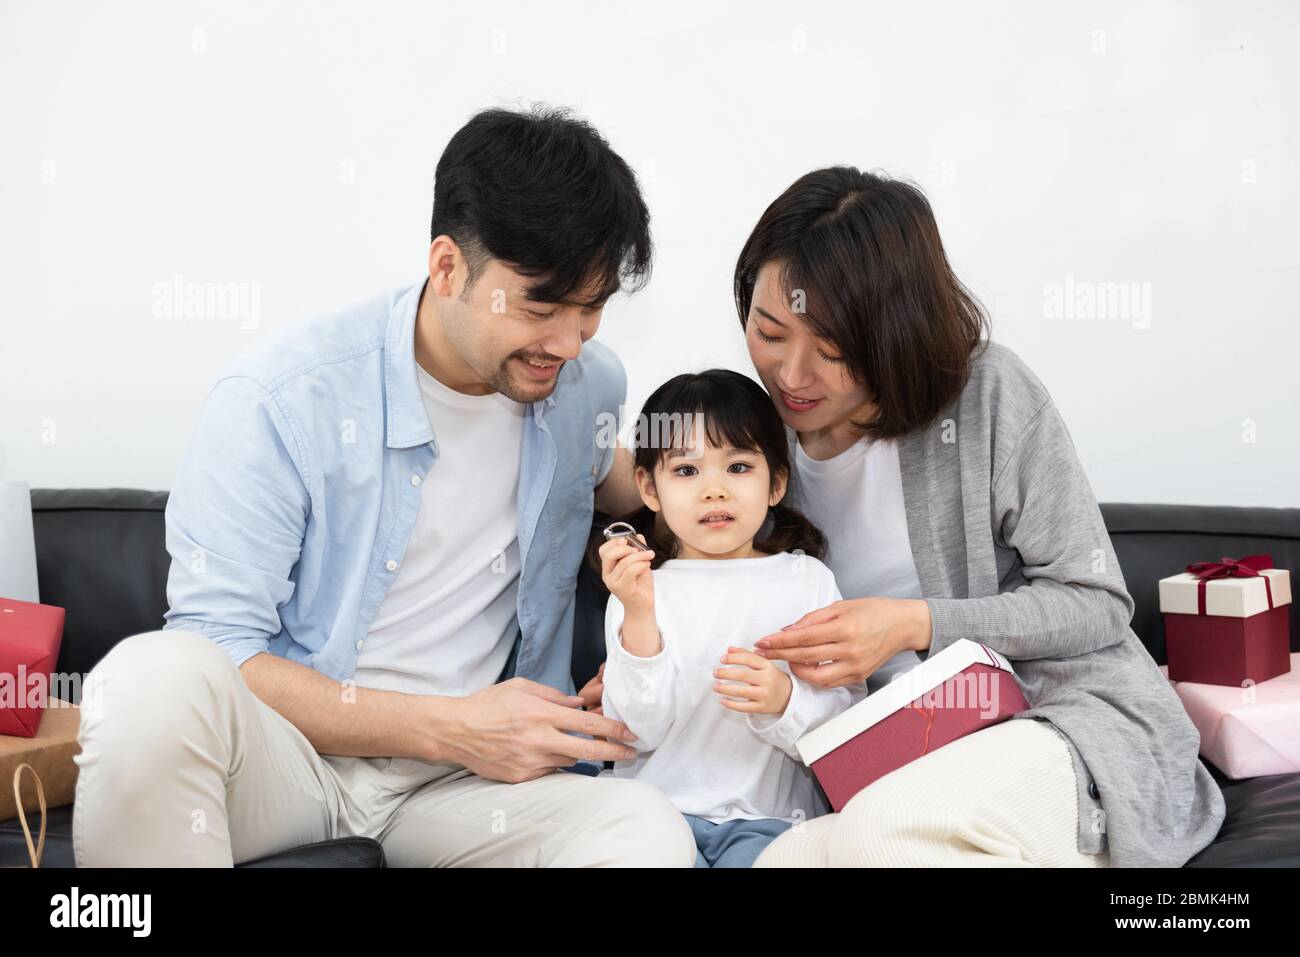 https://c8.alamy.com/comp/2BMK4HM/young-asian-mom-and-dad-are-unpacking-gifts-with-their-daughter-2BMK4HM.jpg